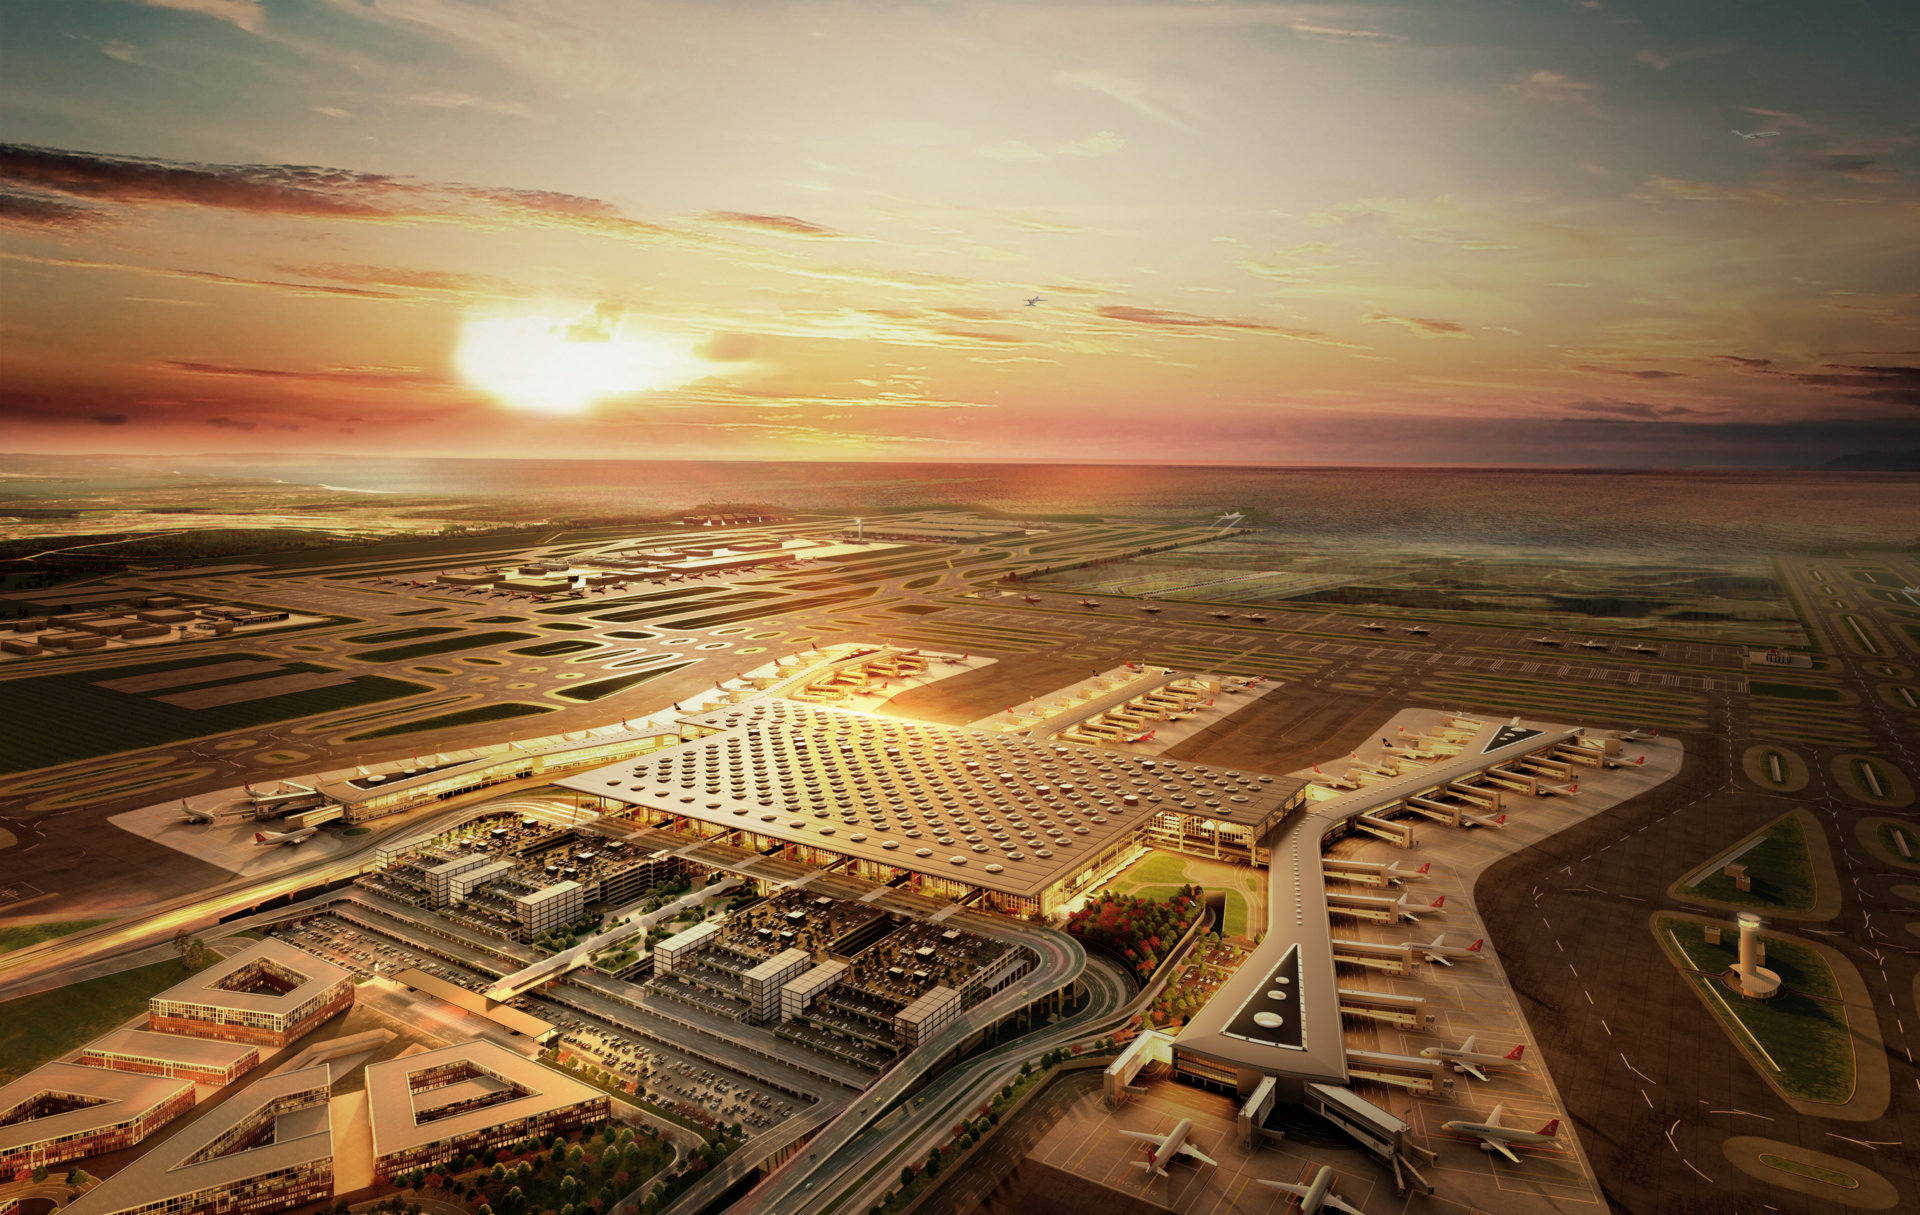 The Istanbul Airport Website is Online with it's Dazzling Design